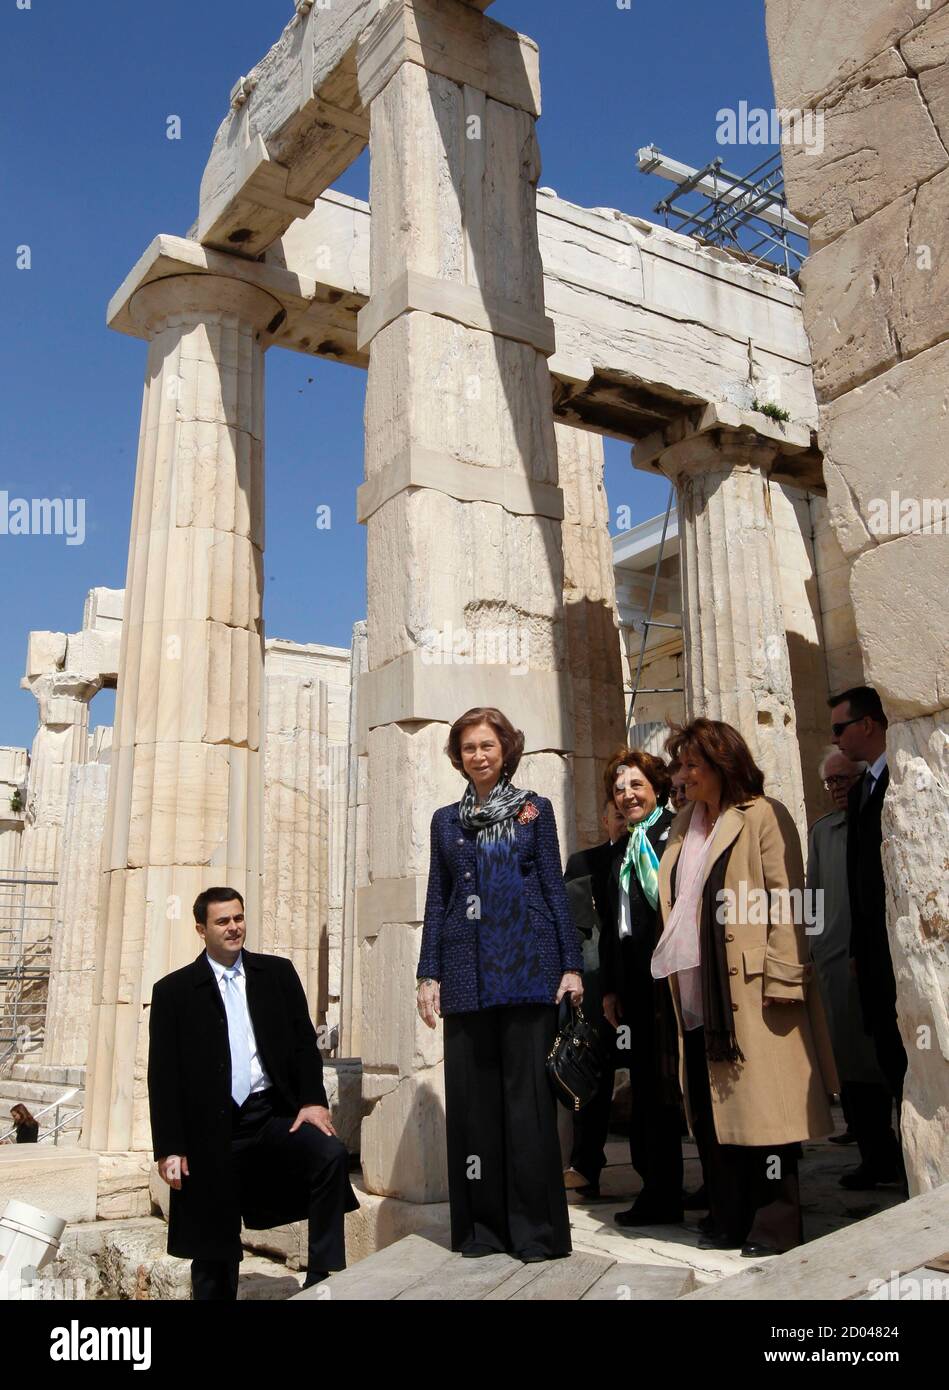 Queen Sofia of Spain looks at the temple of Athena Nike at the Acropolis  hill in Athens March 23, 2011. REUTERS/Yiorgos Karahalis (GREECE - Tags:  SOCIETY ROYALS POLITICS Stock Photo - Alamy